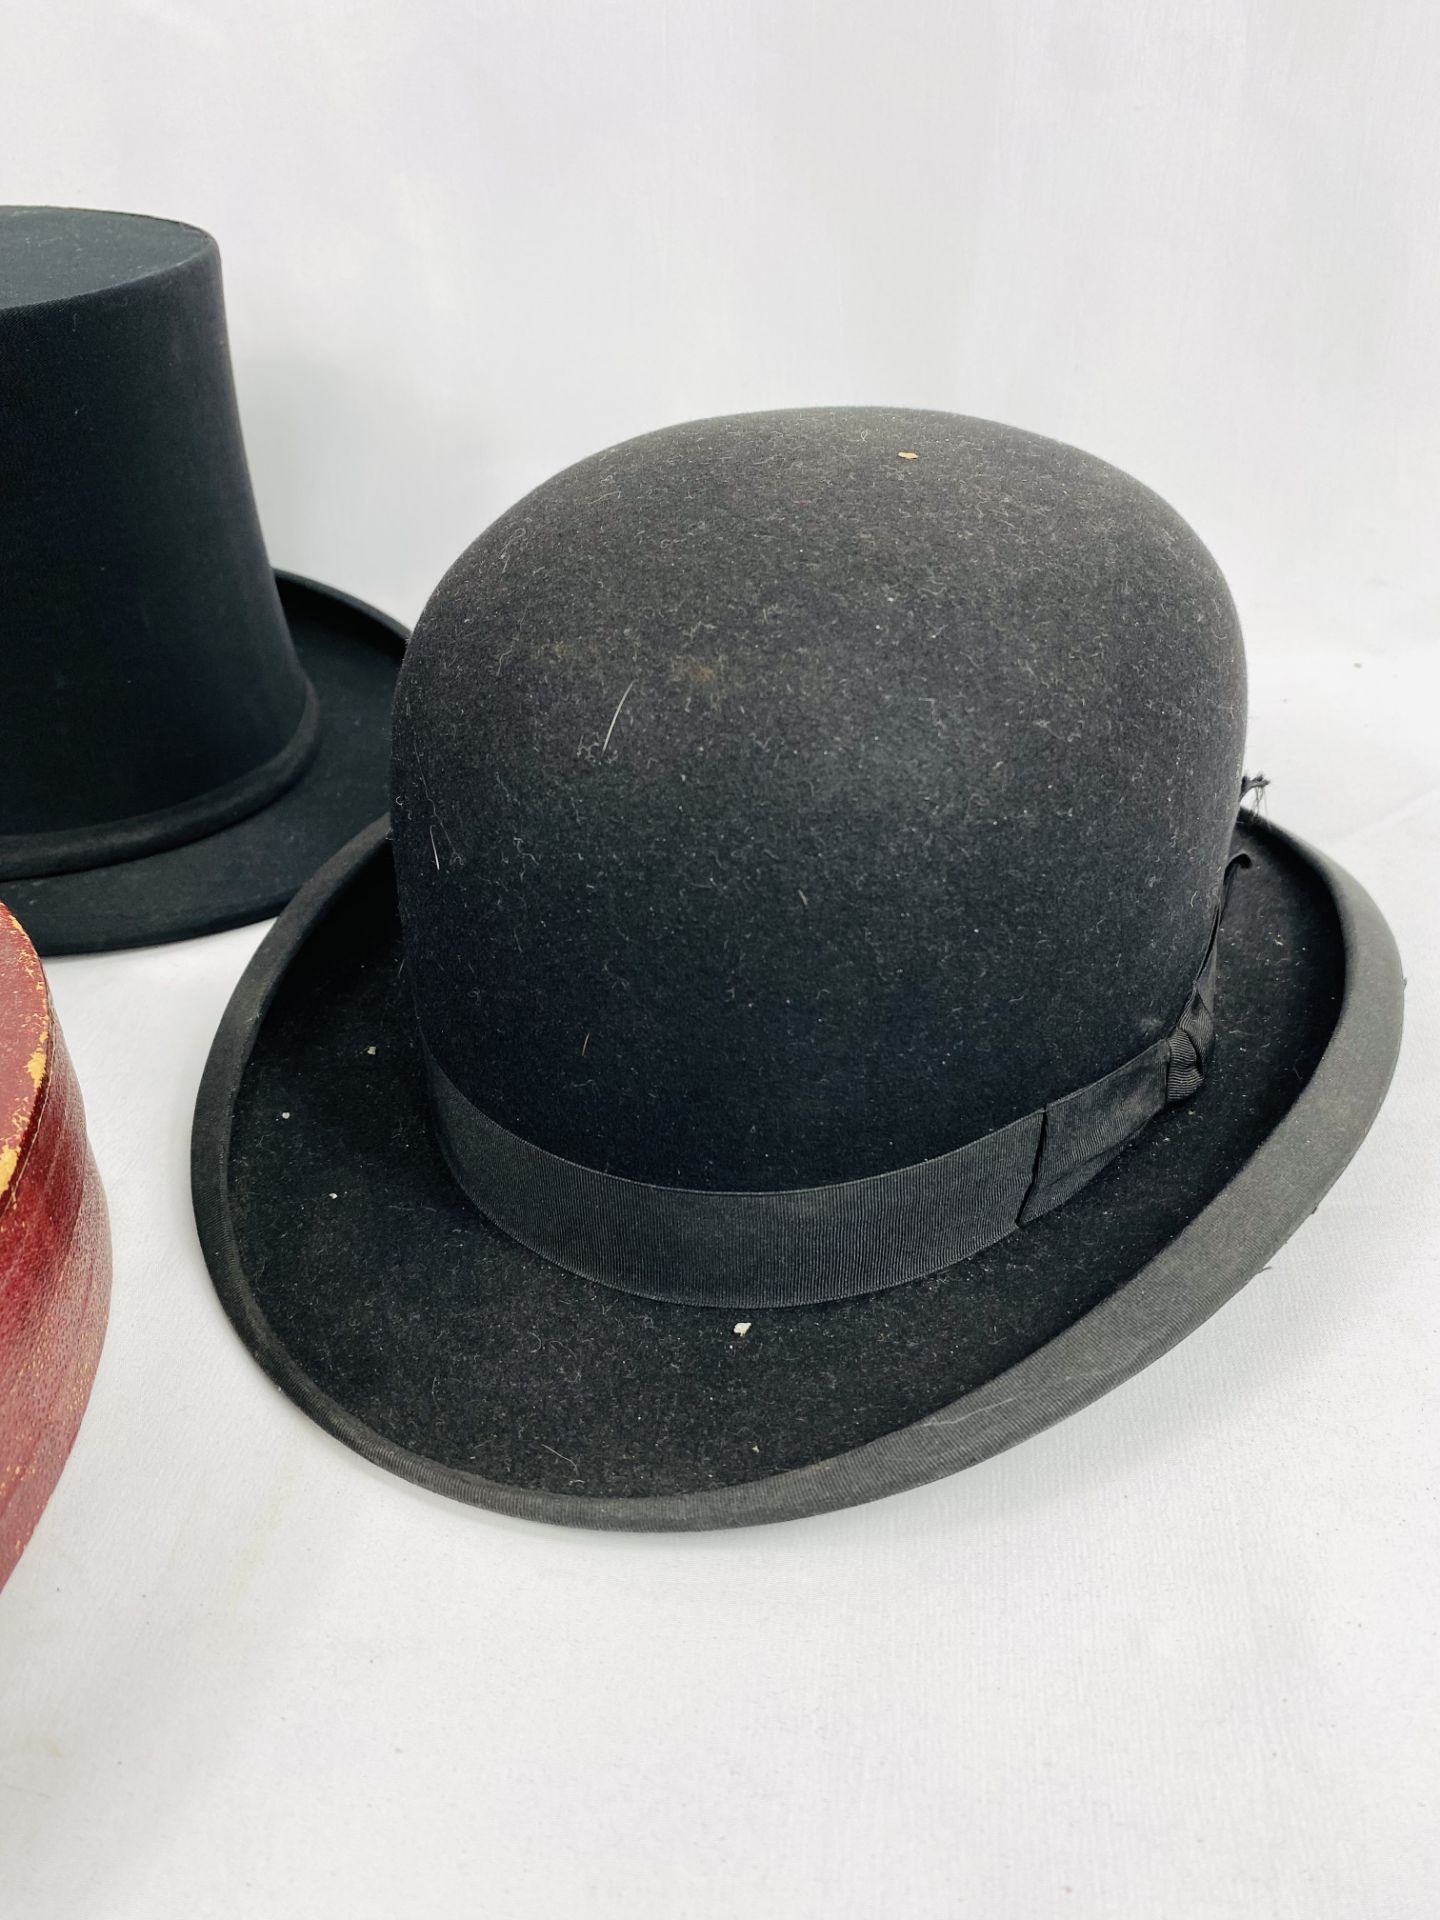 Scott & Co bowler hat together with a collapsible opera hat - Image 2 of 5